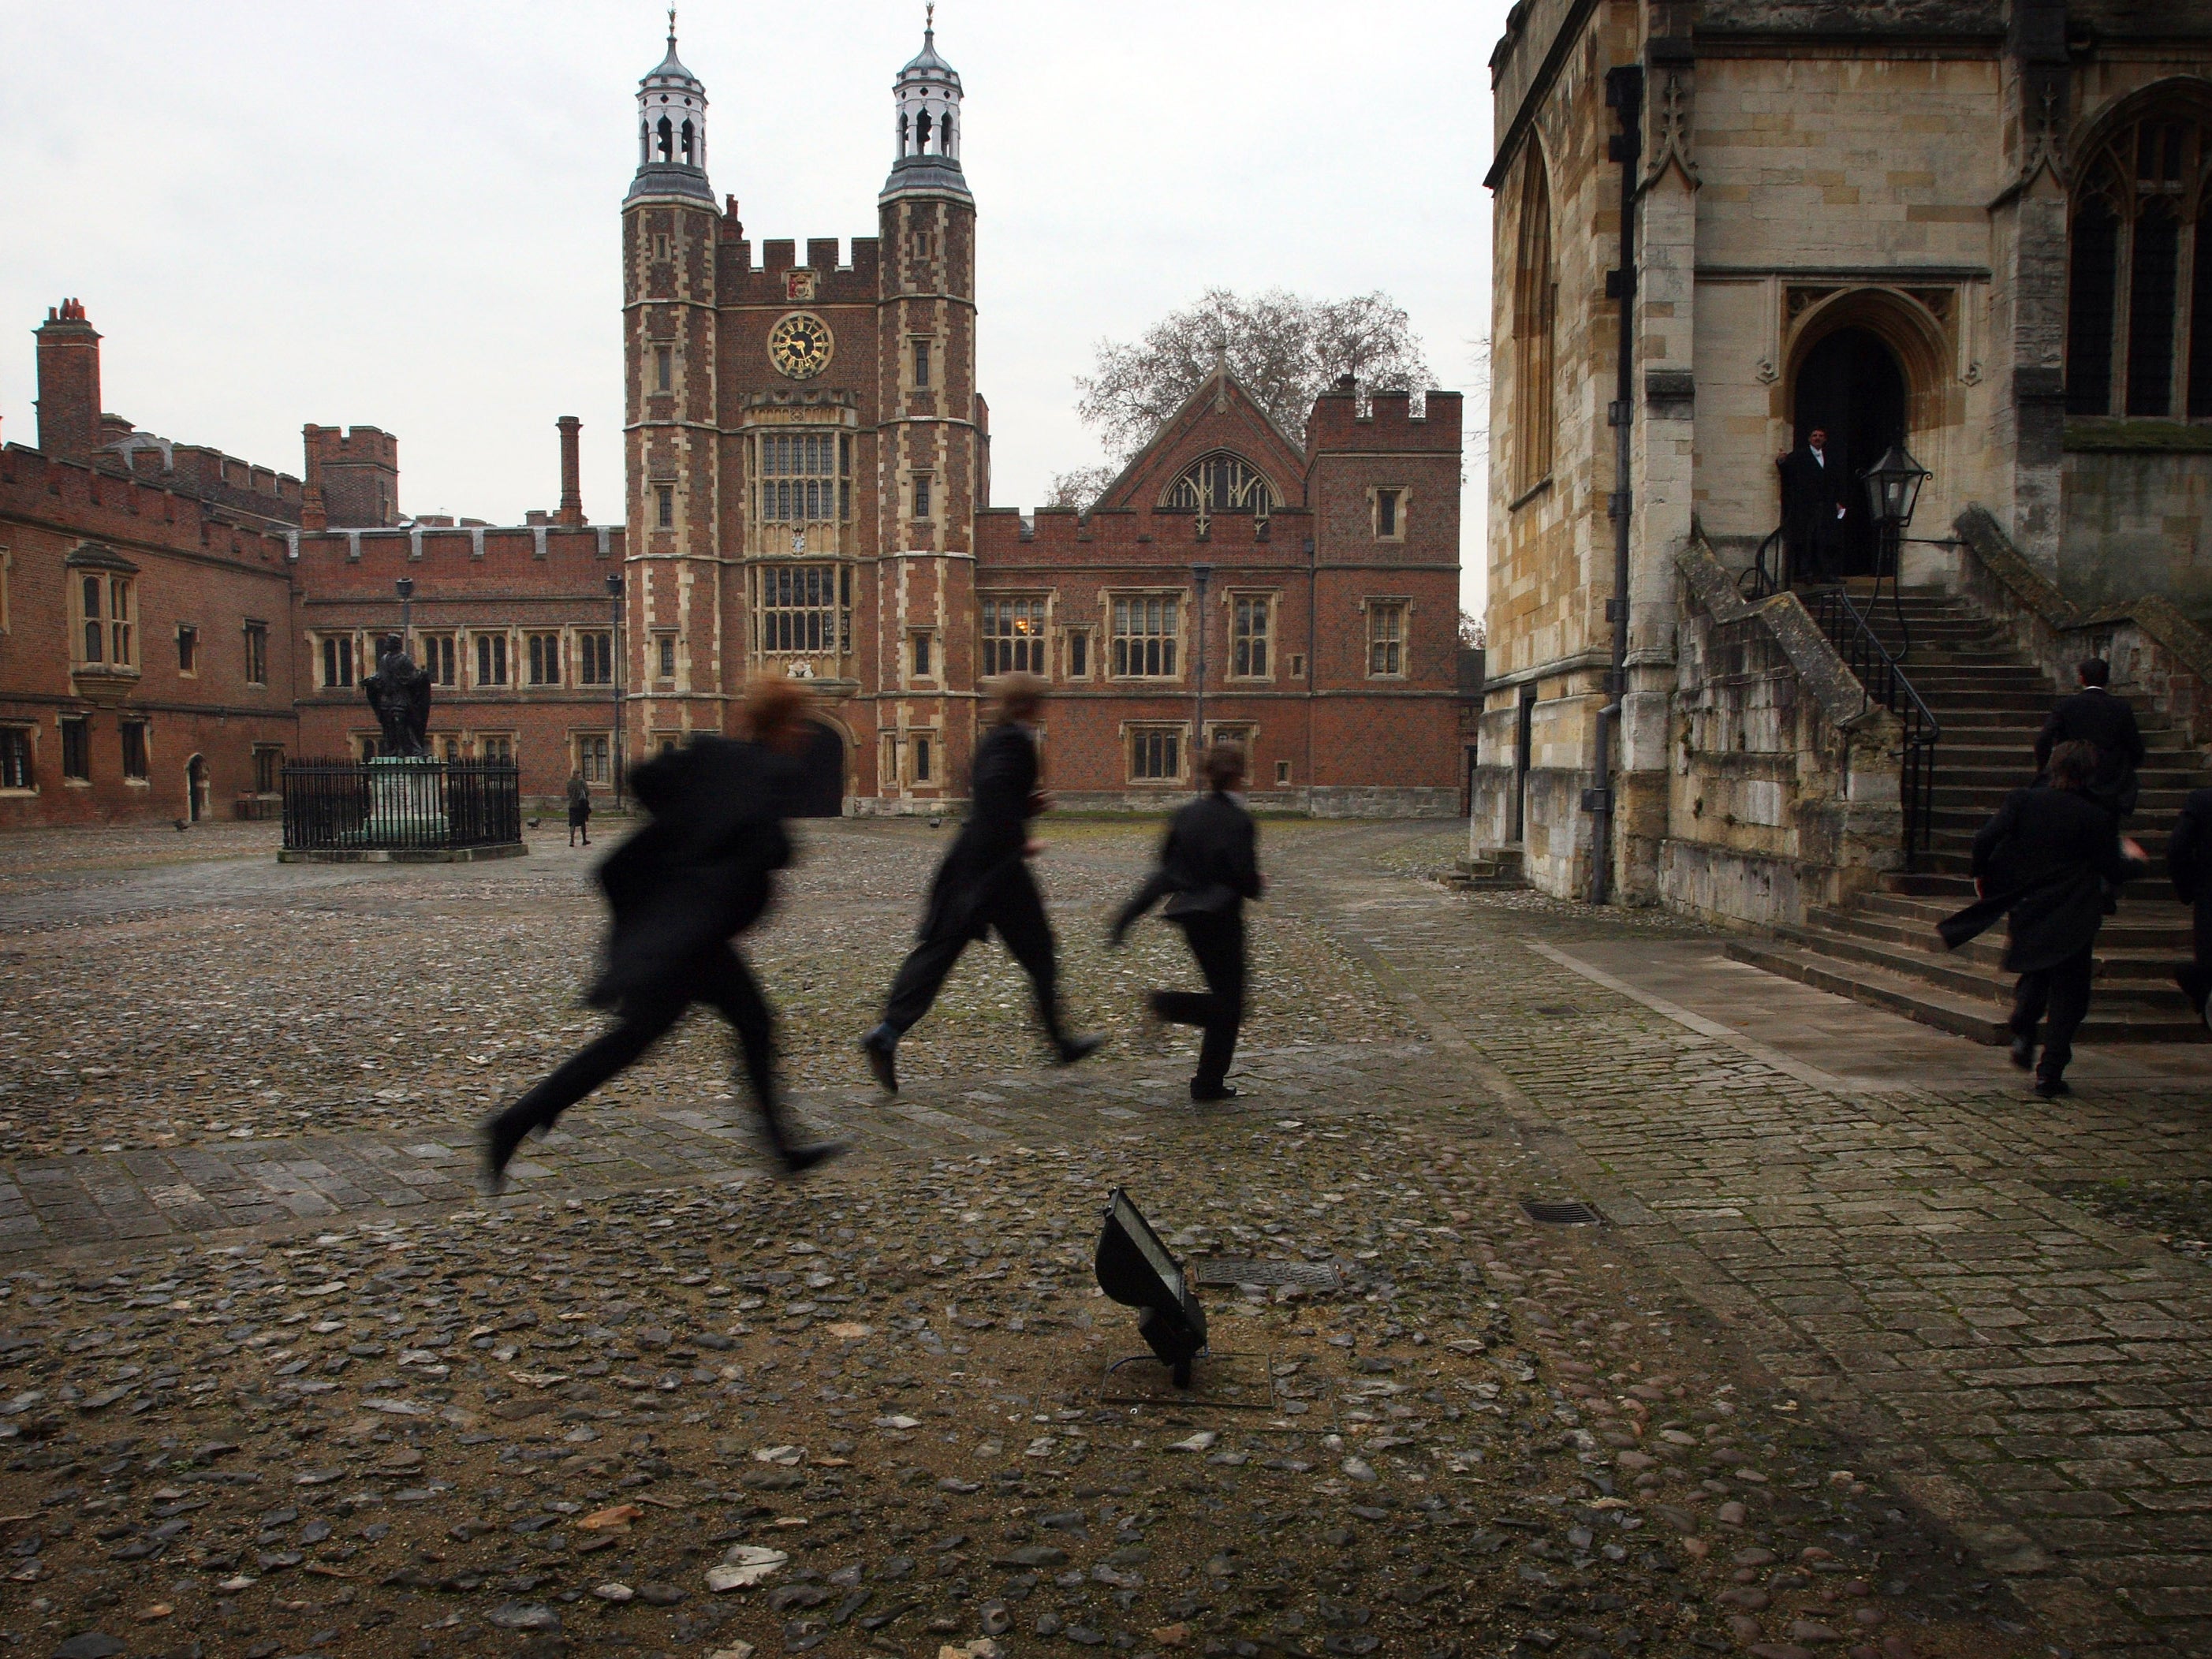 Private schools such as Eton will have to up their already considerable fees